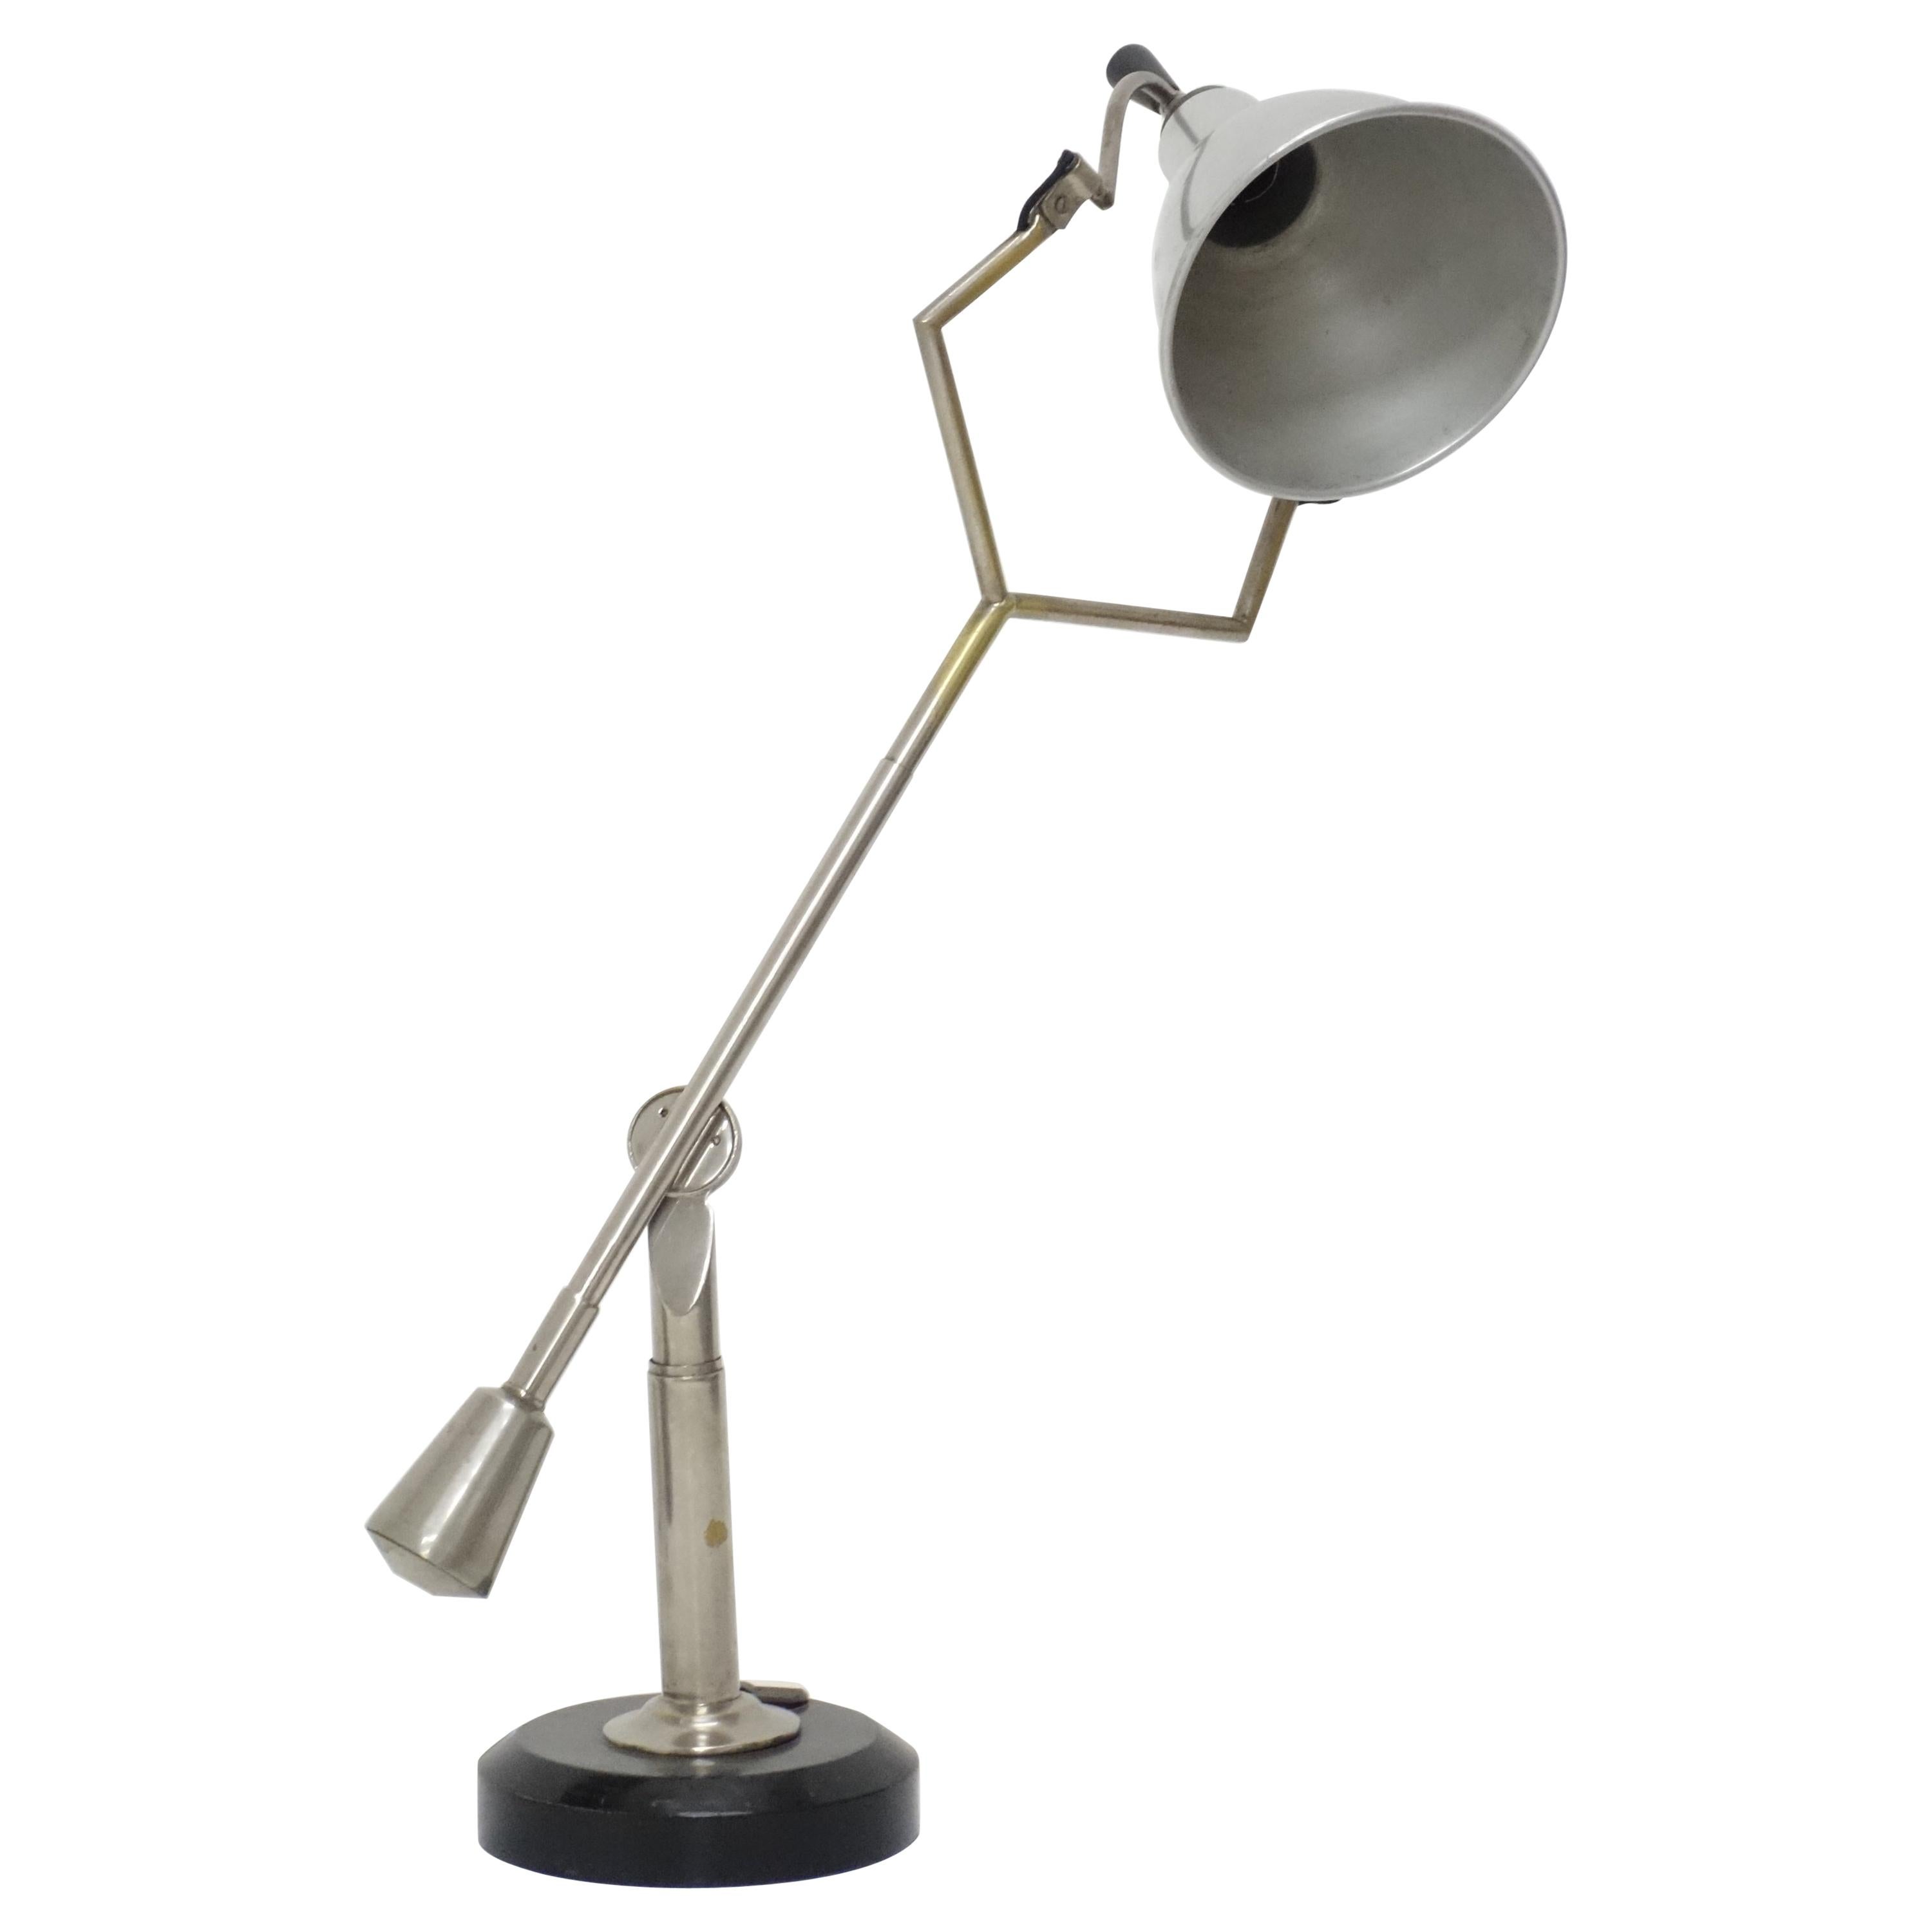 Modernist Nickel-Plated Counterbalance Lamp by Eduard-Wilfrid Buquet, circa 1925 For Sale